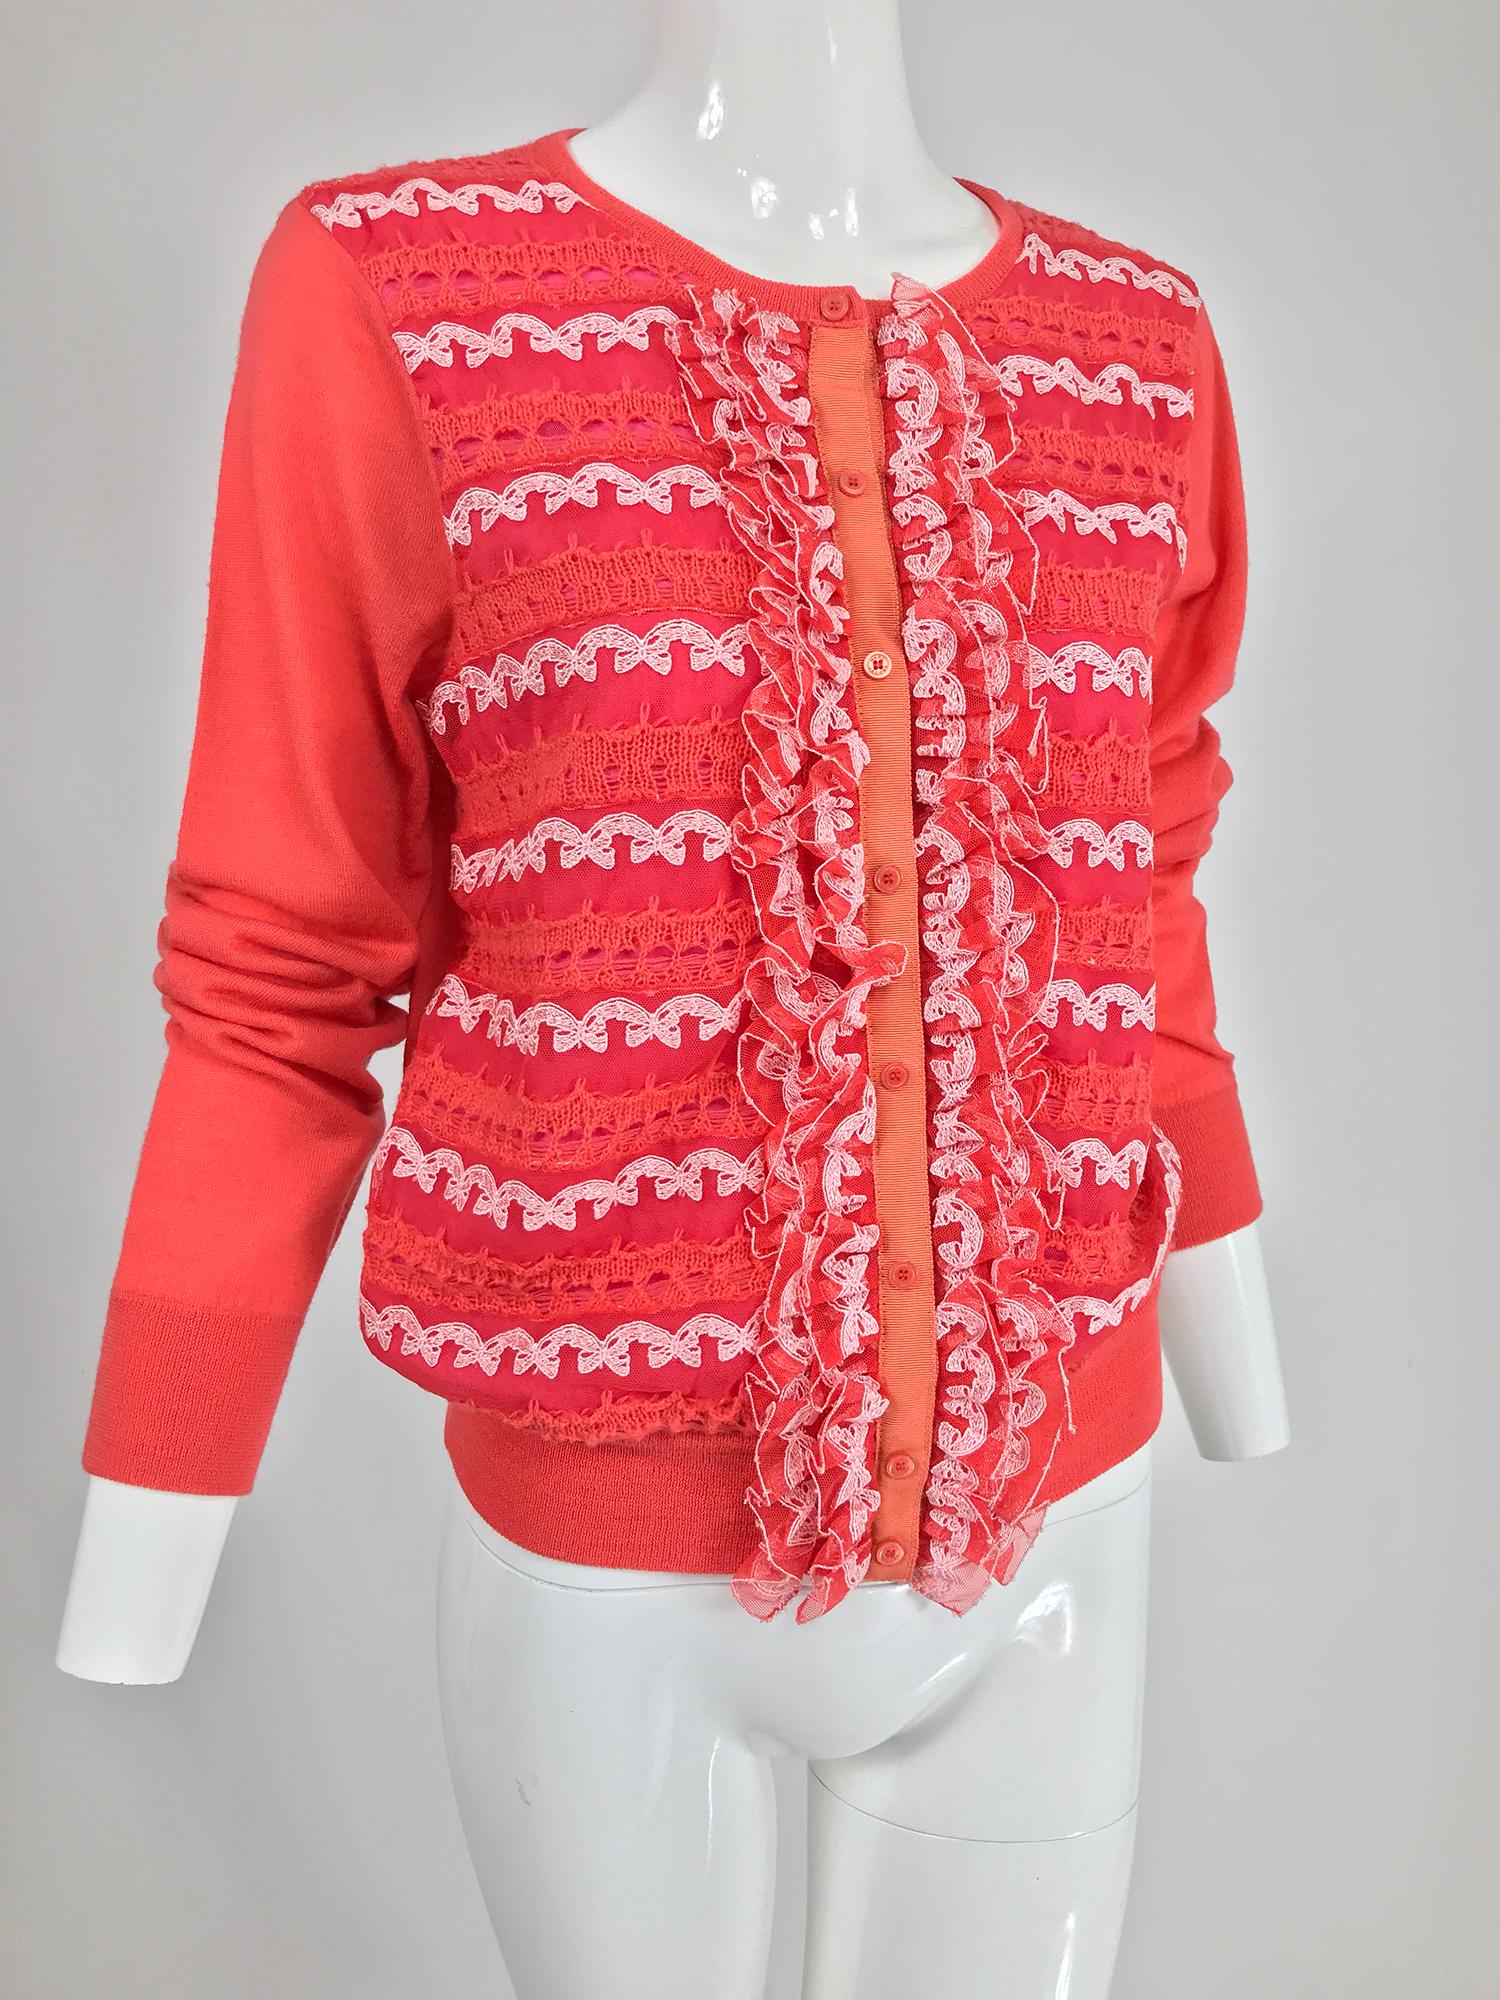 Marc Jacobs orange knit collage cardigan sweater. Long sleeve sweater with ribbed neck, hem and cuffs, the sweater front is done in panels of lace, knit and tulle, with tulle ruffles at either front side, like a collage of sorts. The sweater closes